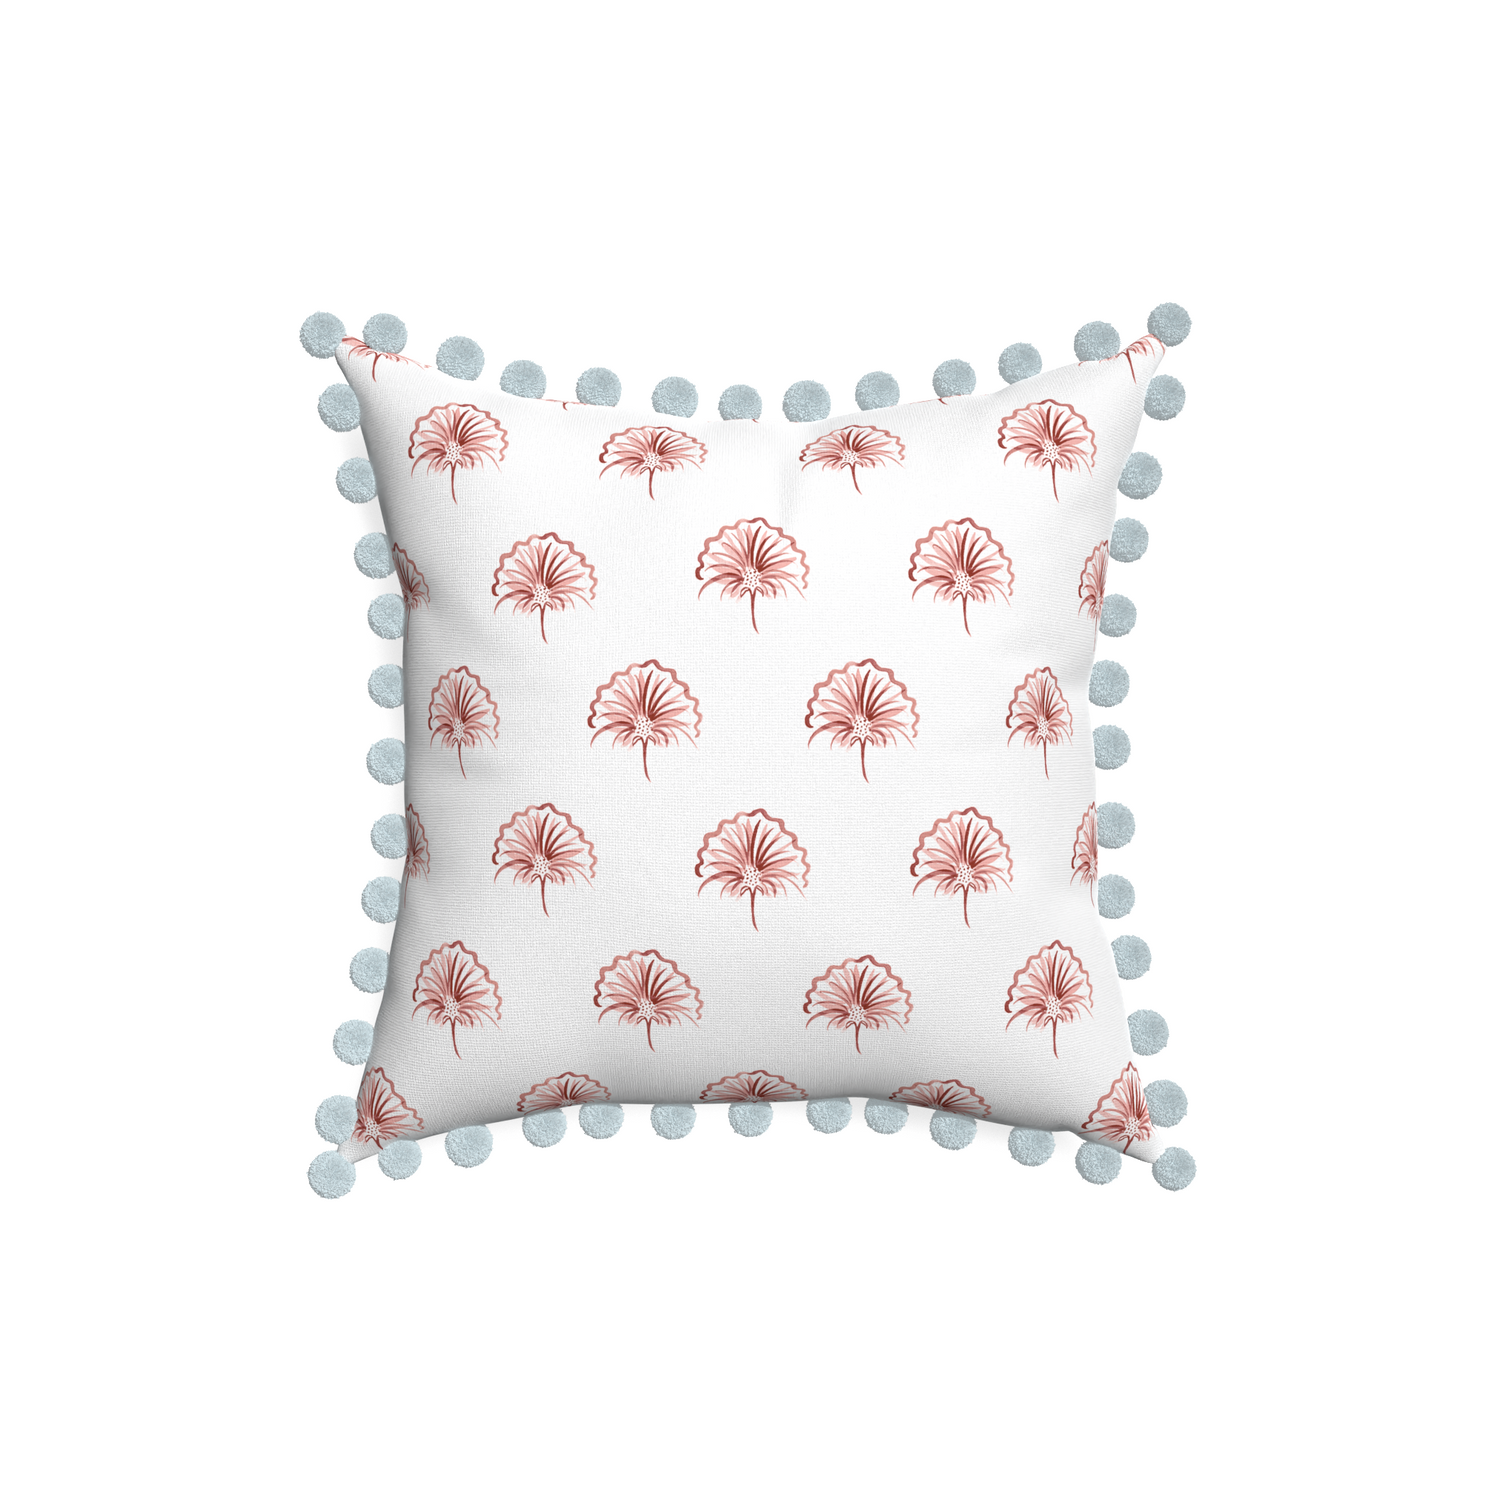 18-square penelope rose custom floral pinkpillow with powder pom pom on white background